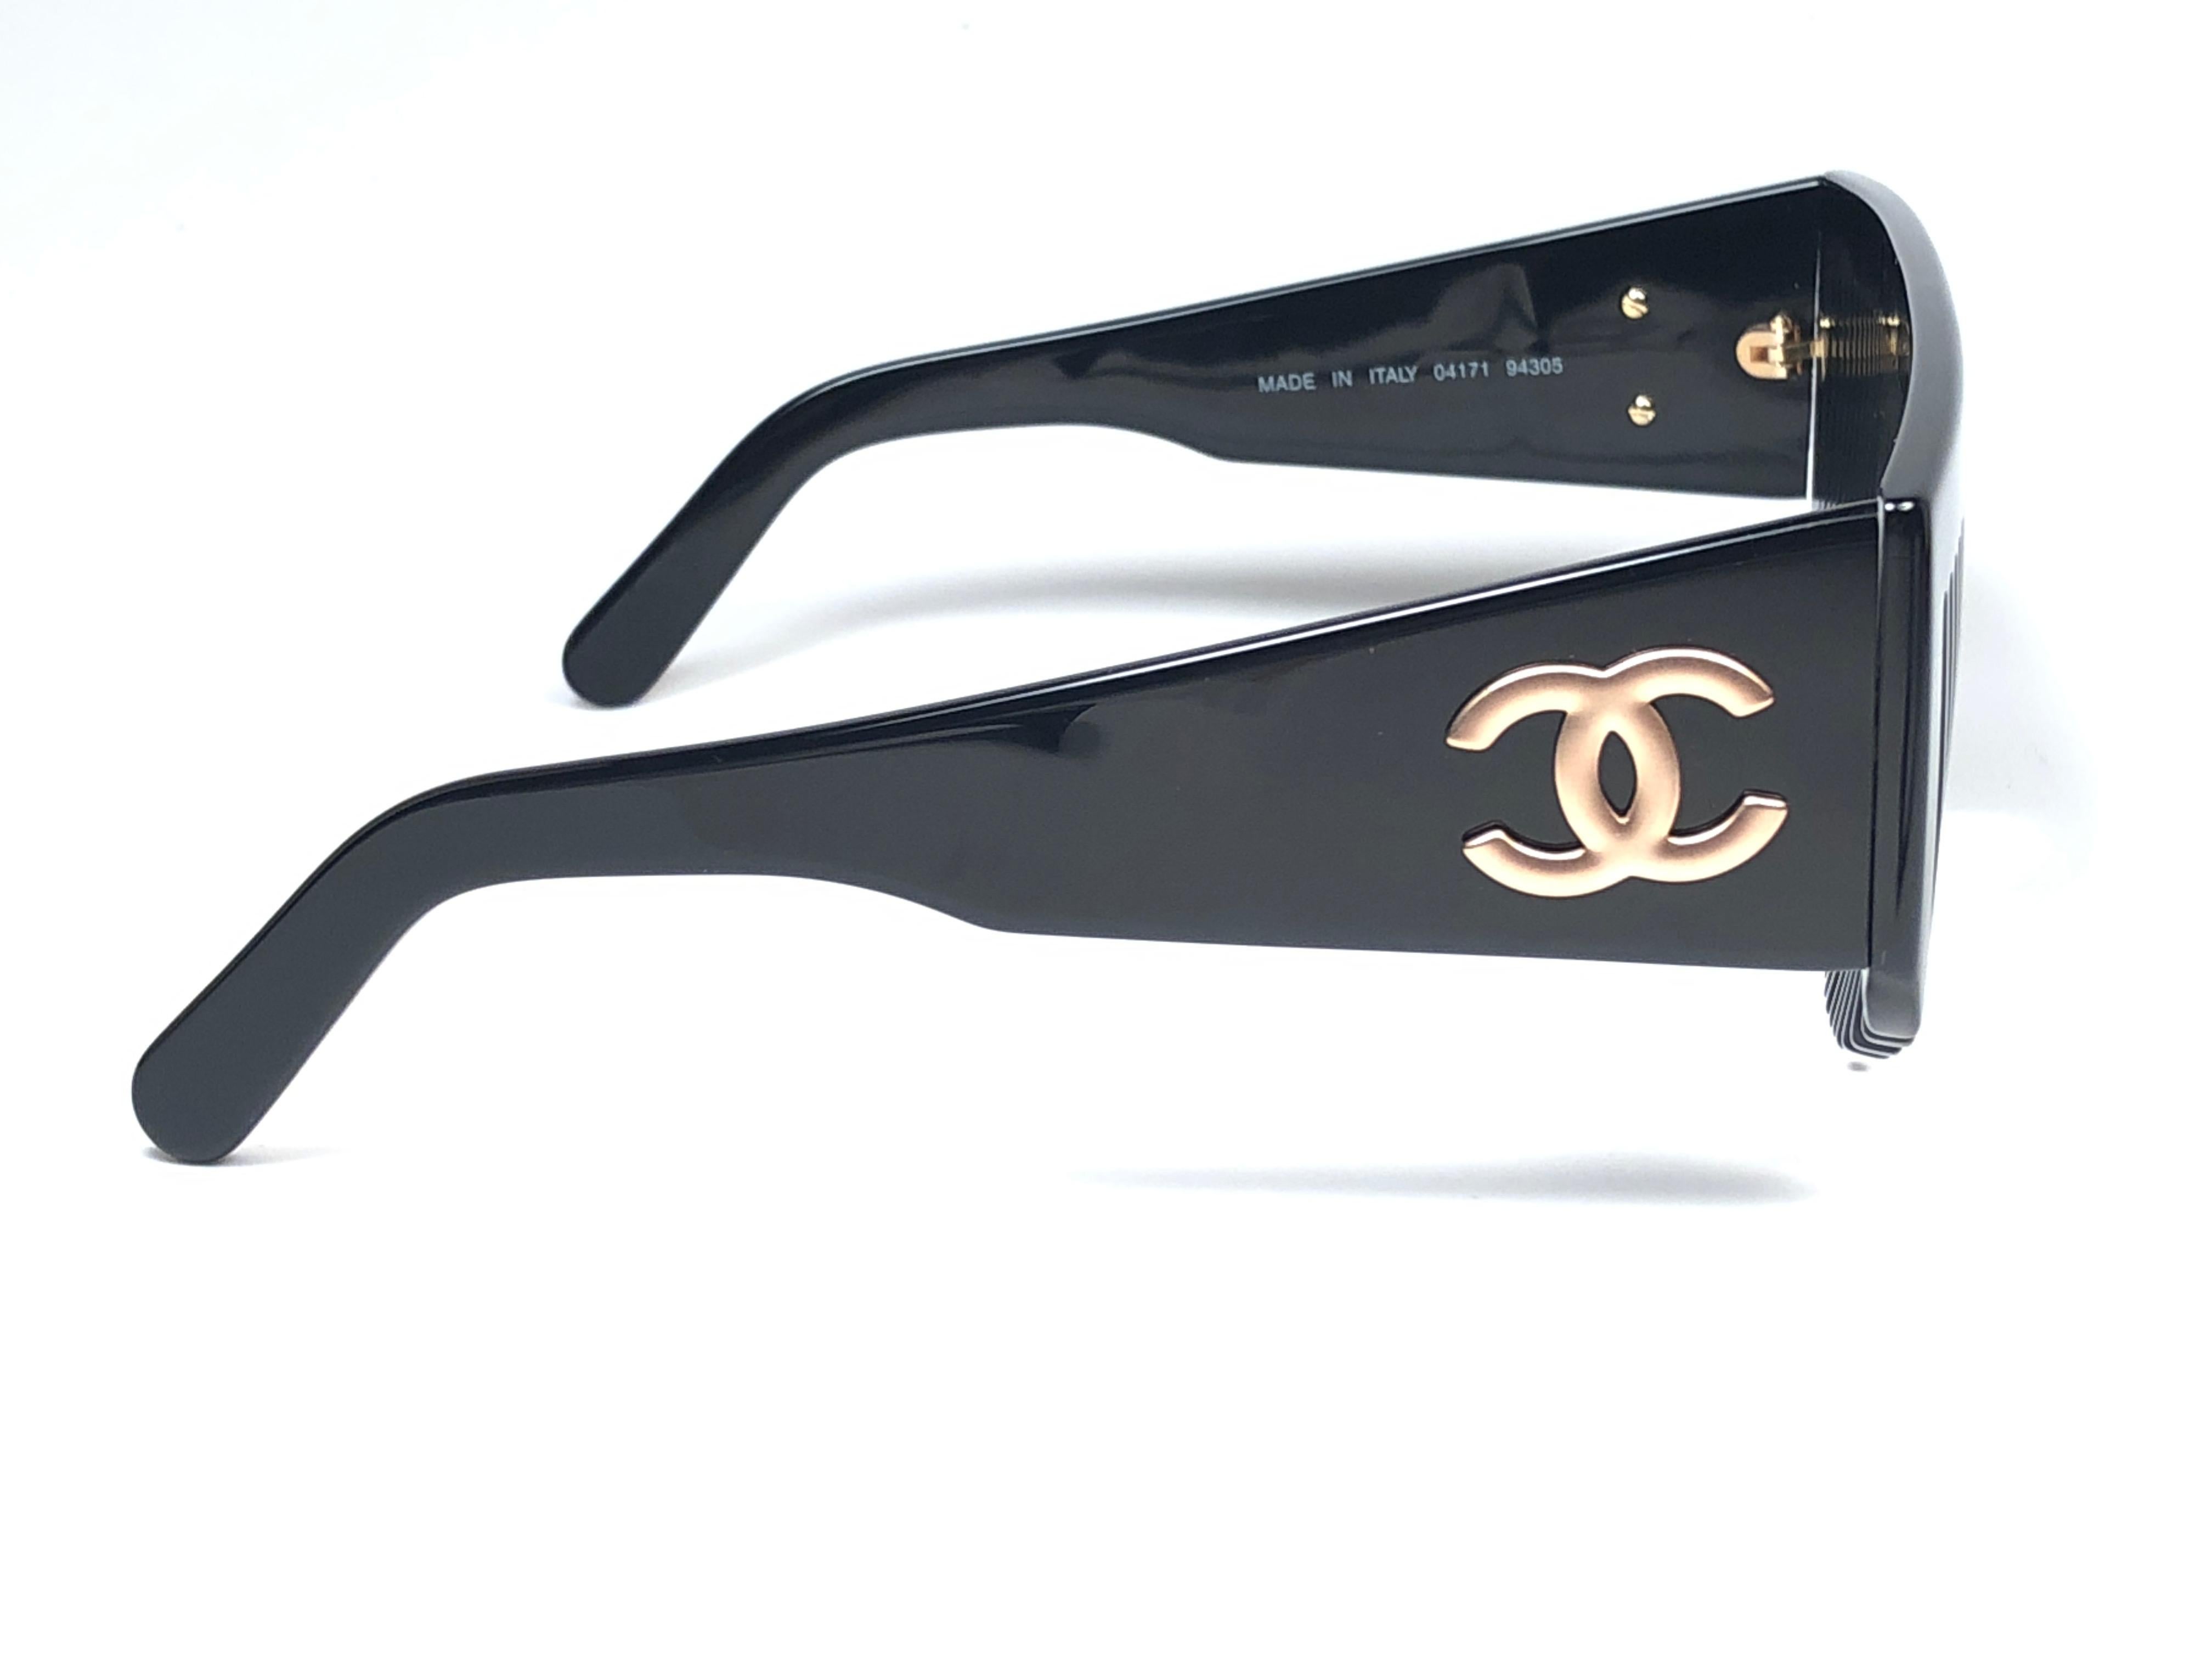 Vintage Chanel Vintage Black Comb Made In Italy Sunglasses 1993 2